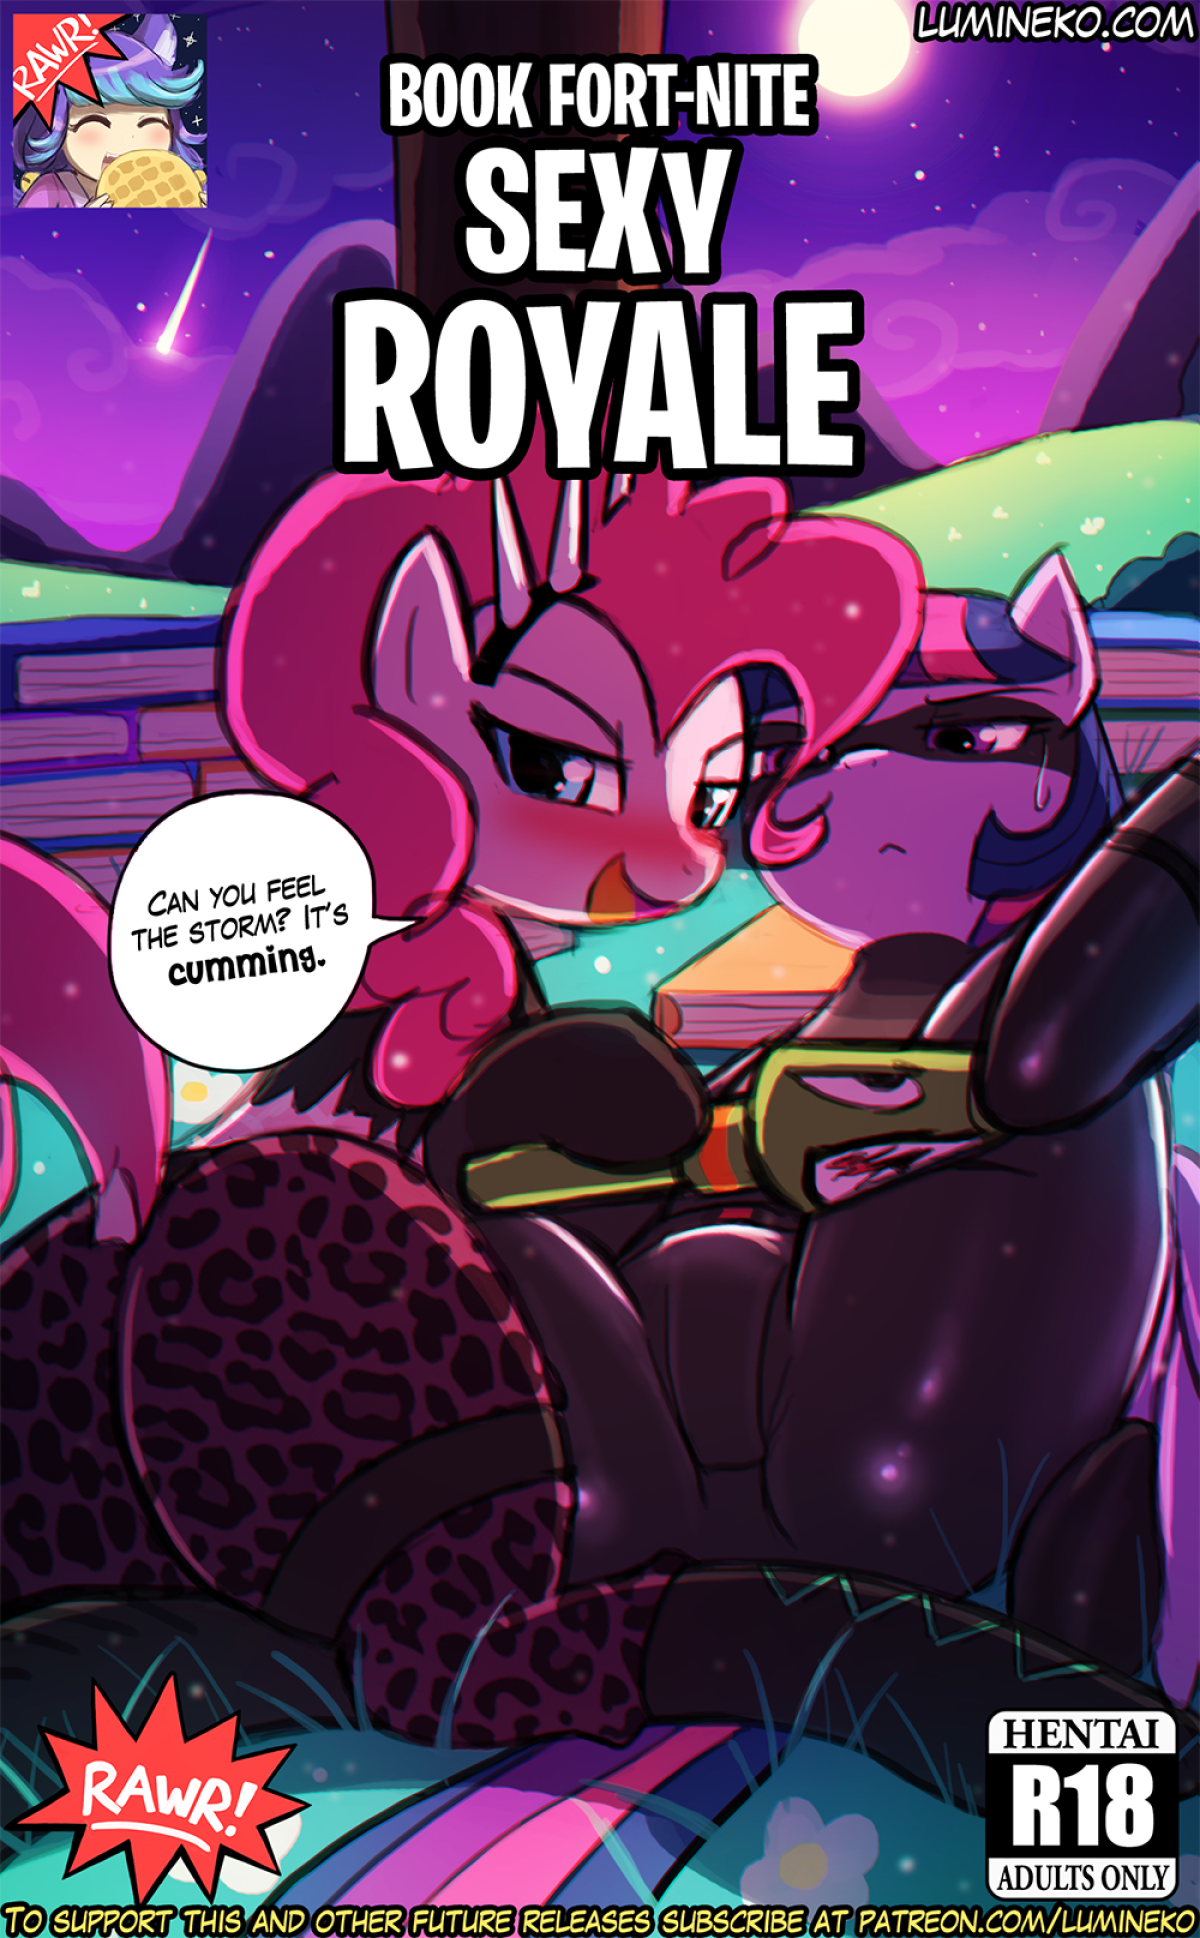 Book Fort-Nite SexyRoyale porn comics Latex, Lesbians, Sex Toys